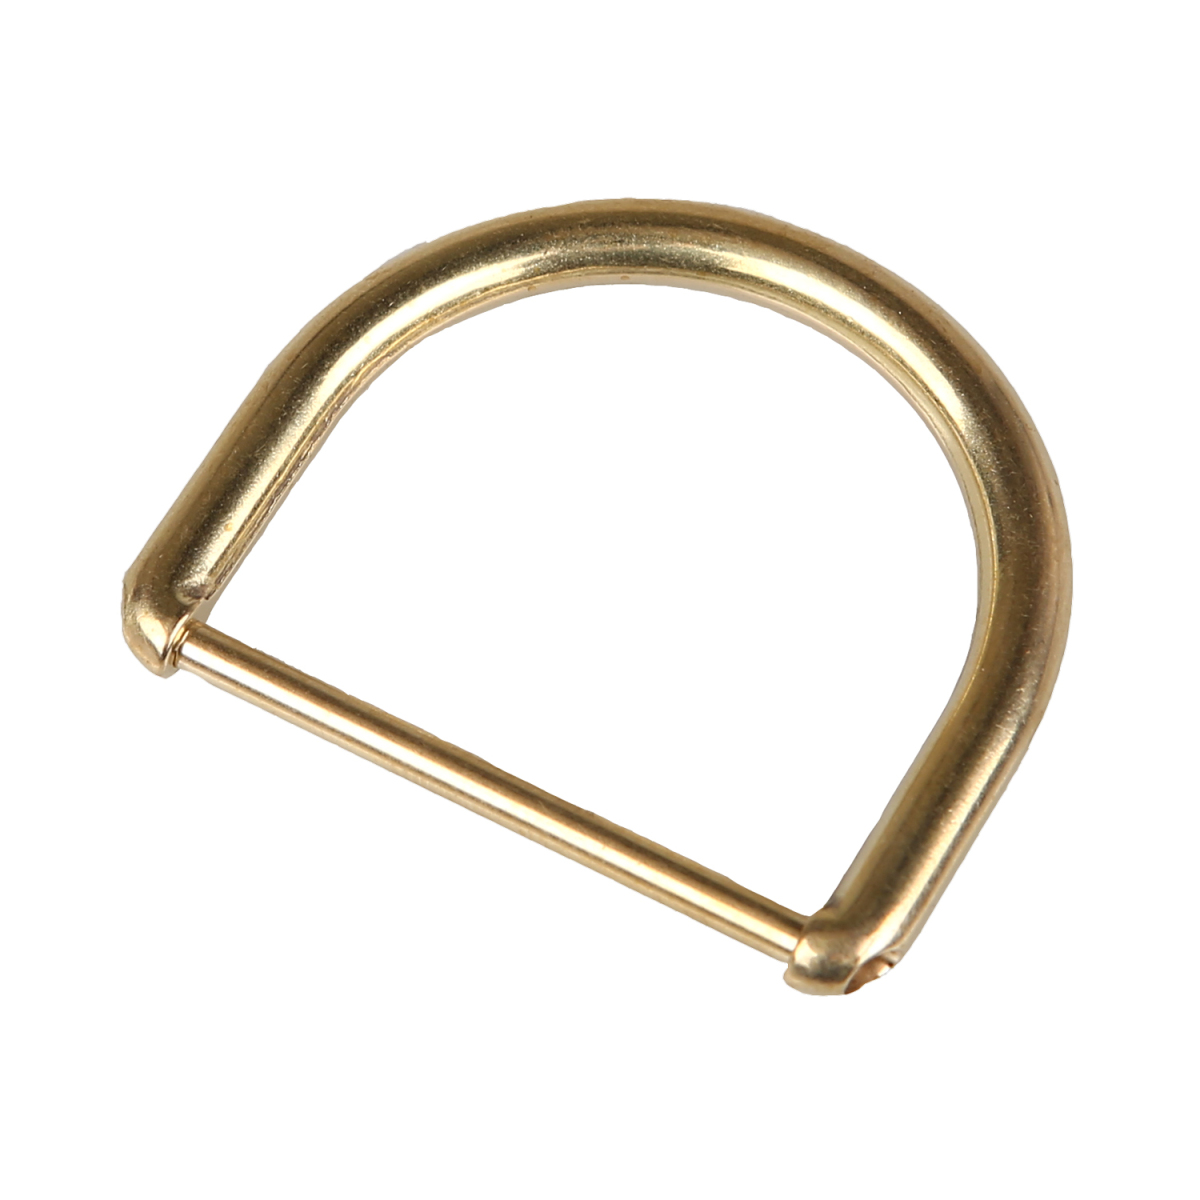 SENWA brass made screw type opening and closing D can shackle 15*20*25*32mm U character type hanging .